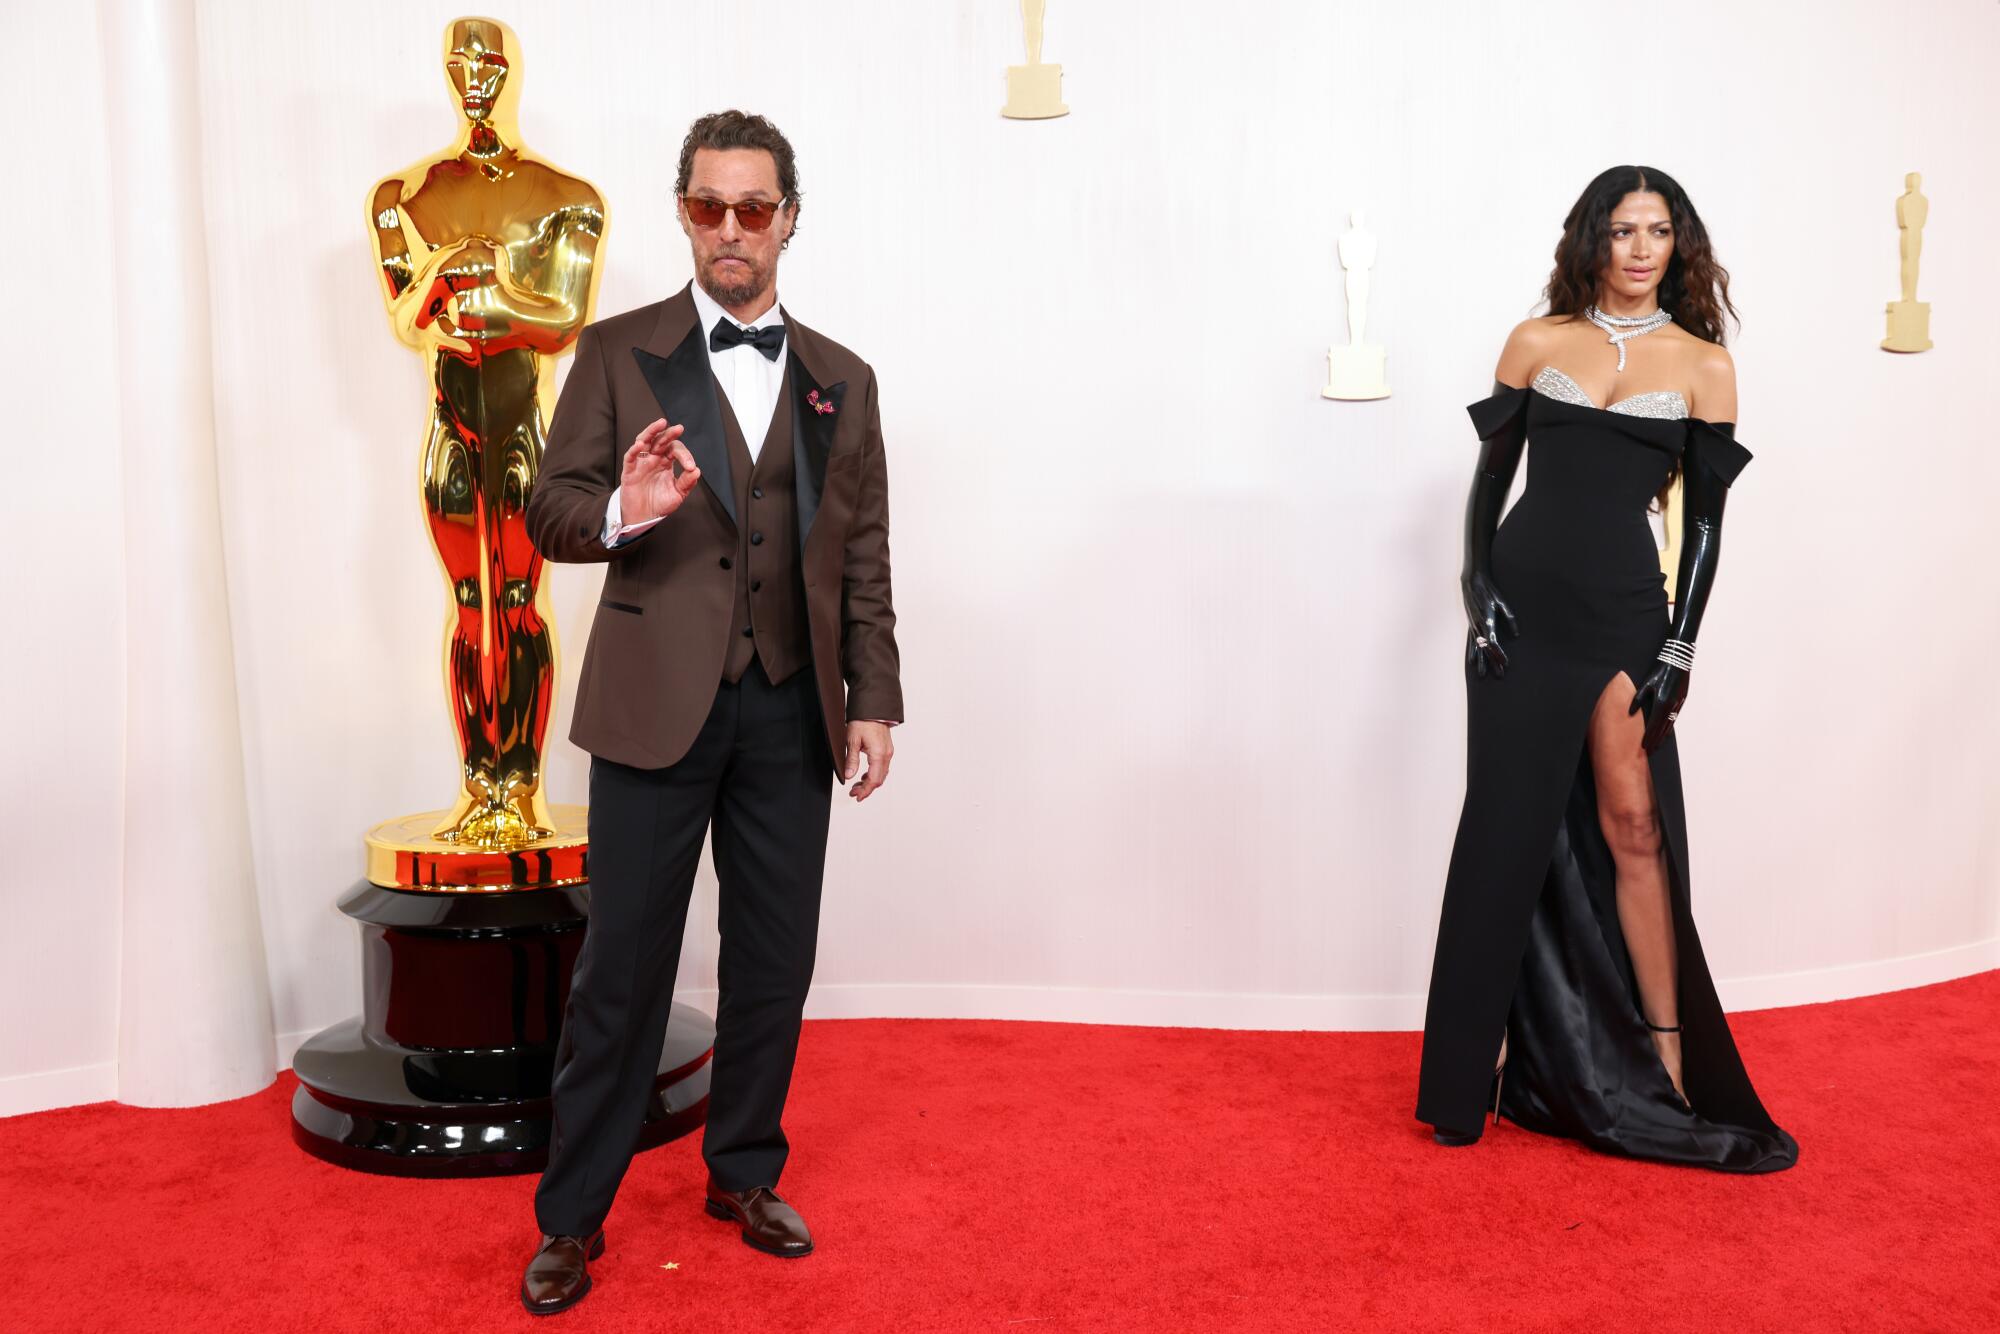 Matthew McConaughey wears a brown jacket, and Camila Alves wears a black gown with opera gloves. 